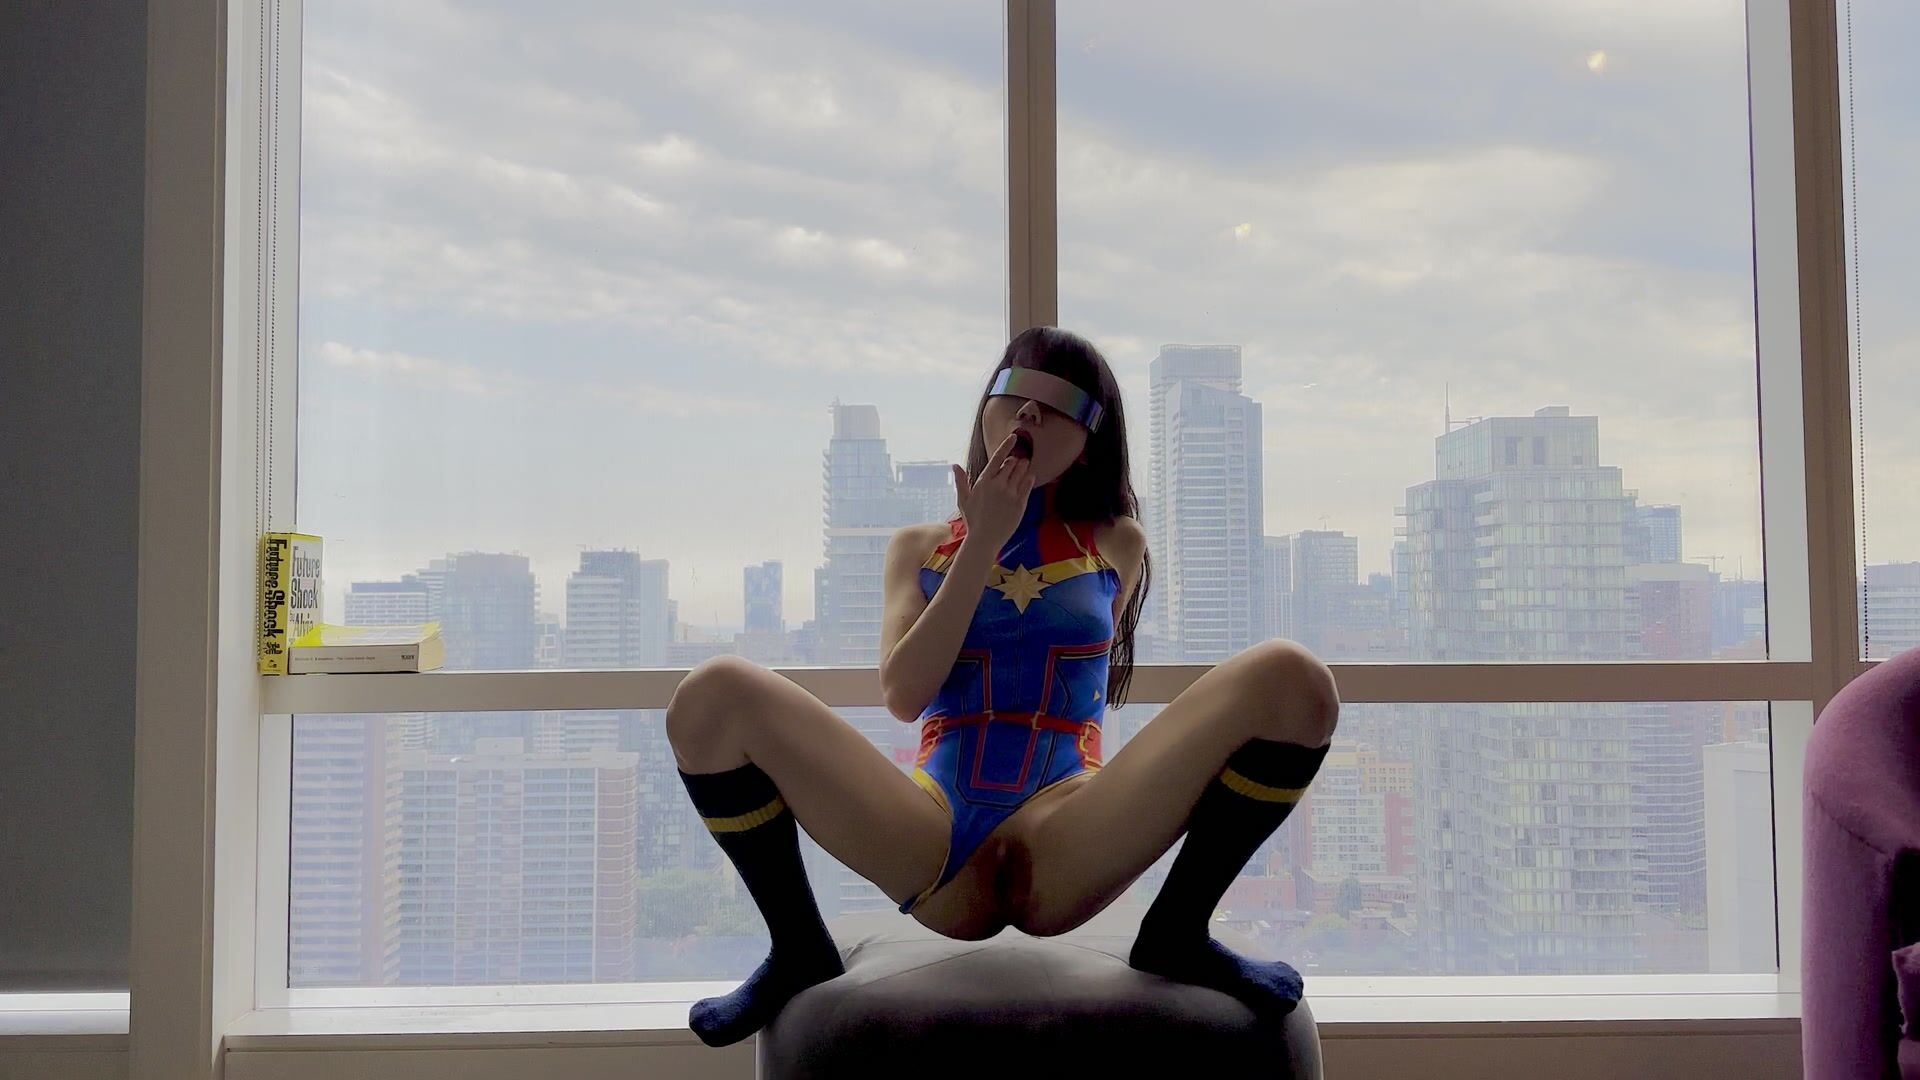 Super girl squirt: knowing the city is watching makes me naughty;)